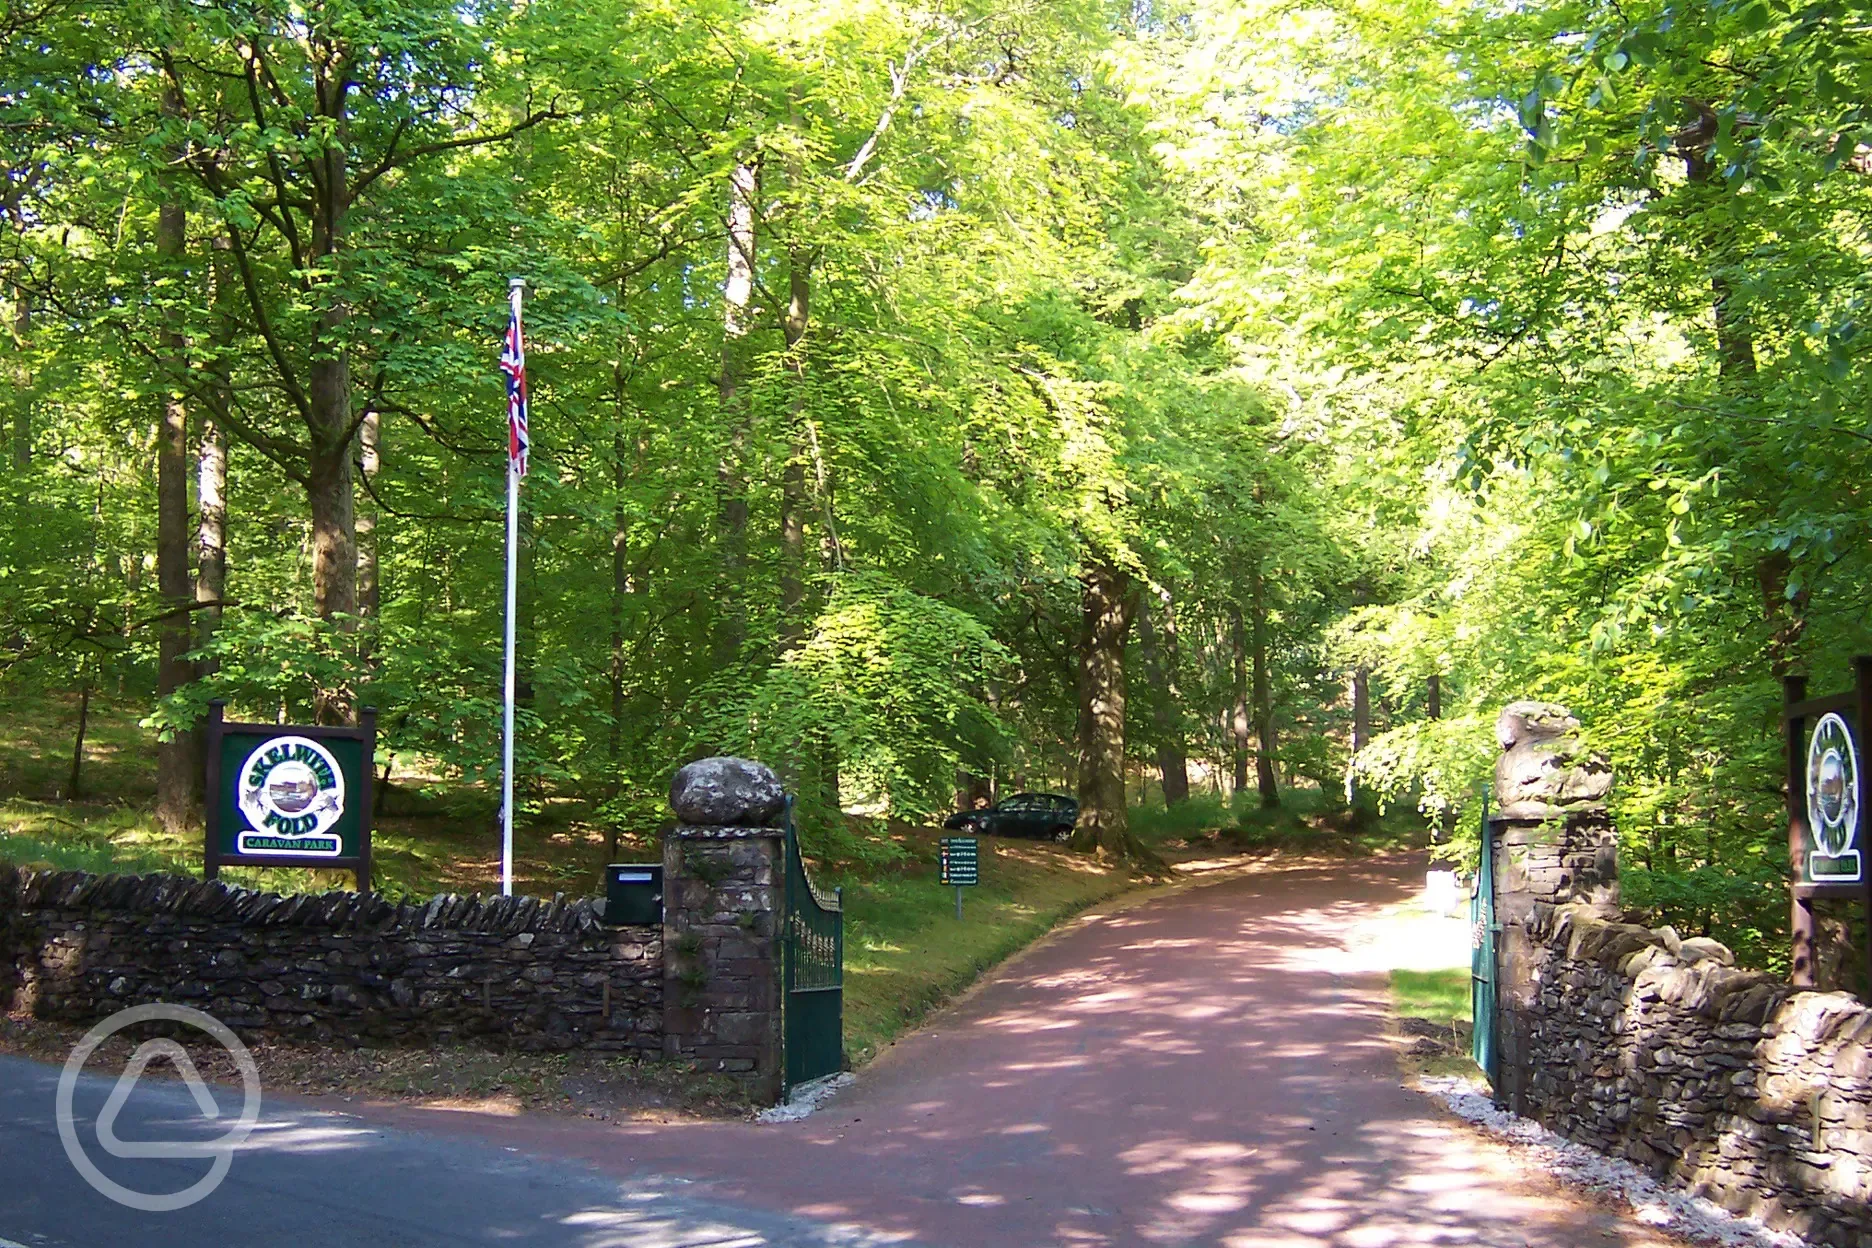 Entrance to Skelwith Fold campsite